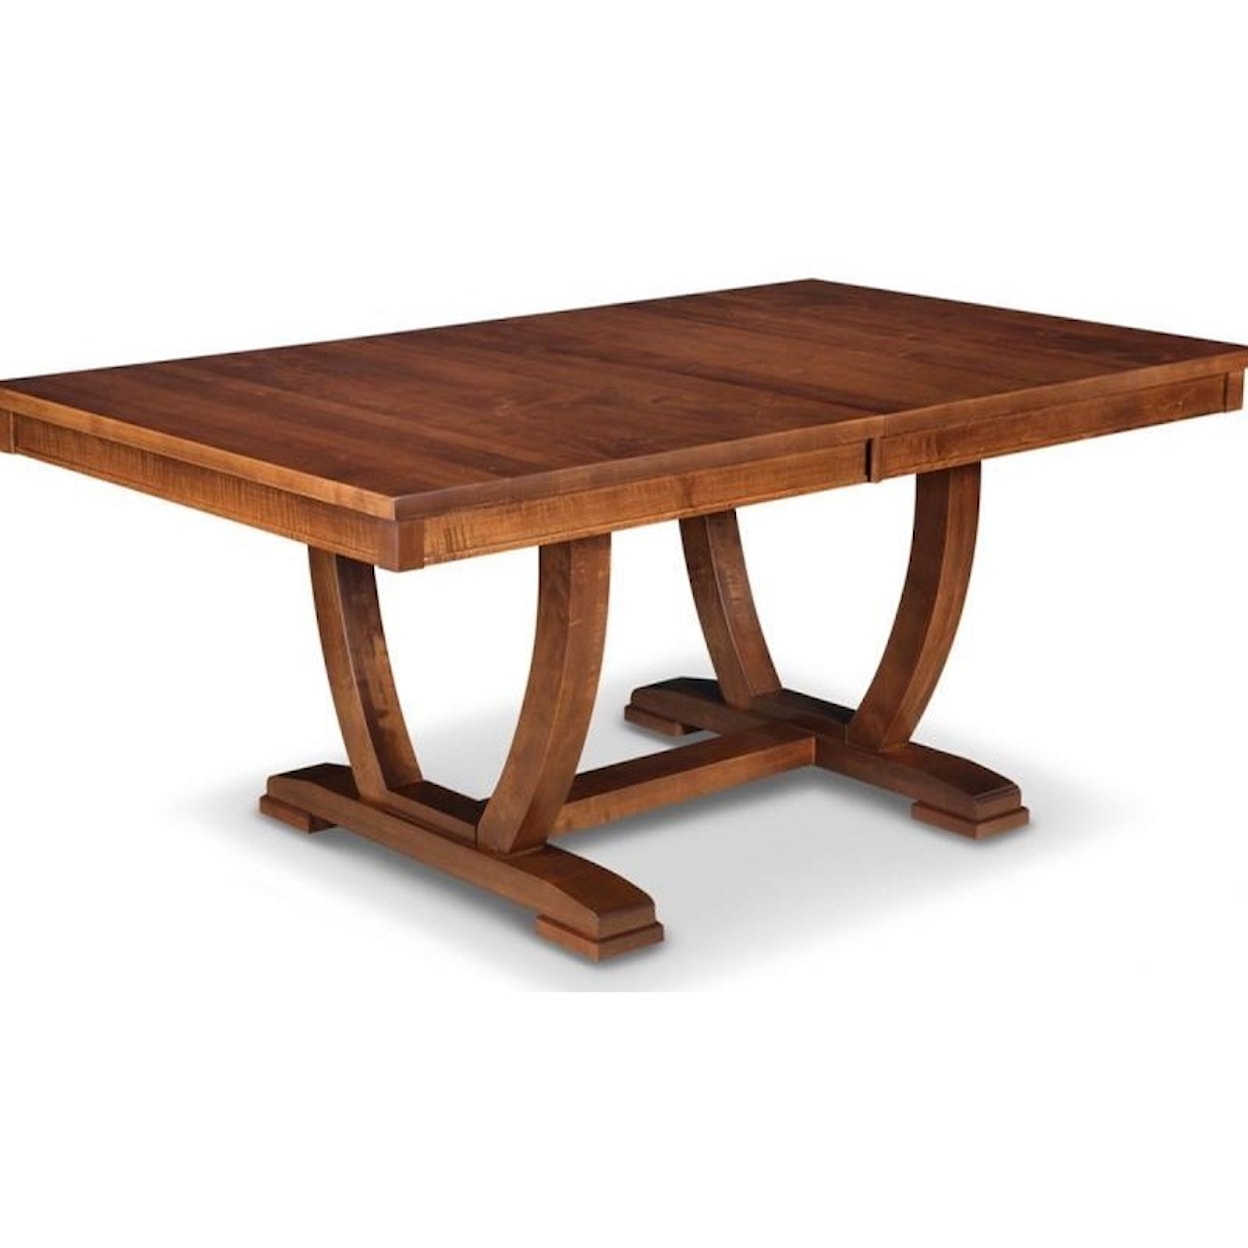 Handstone Florence 48x72" Trestle Dining Table